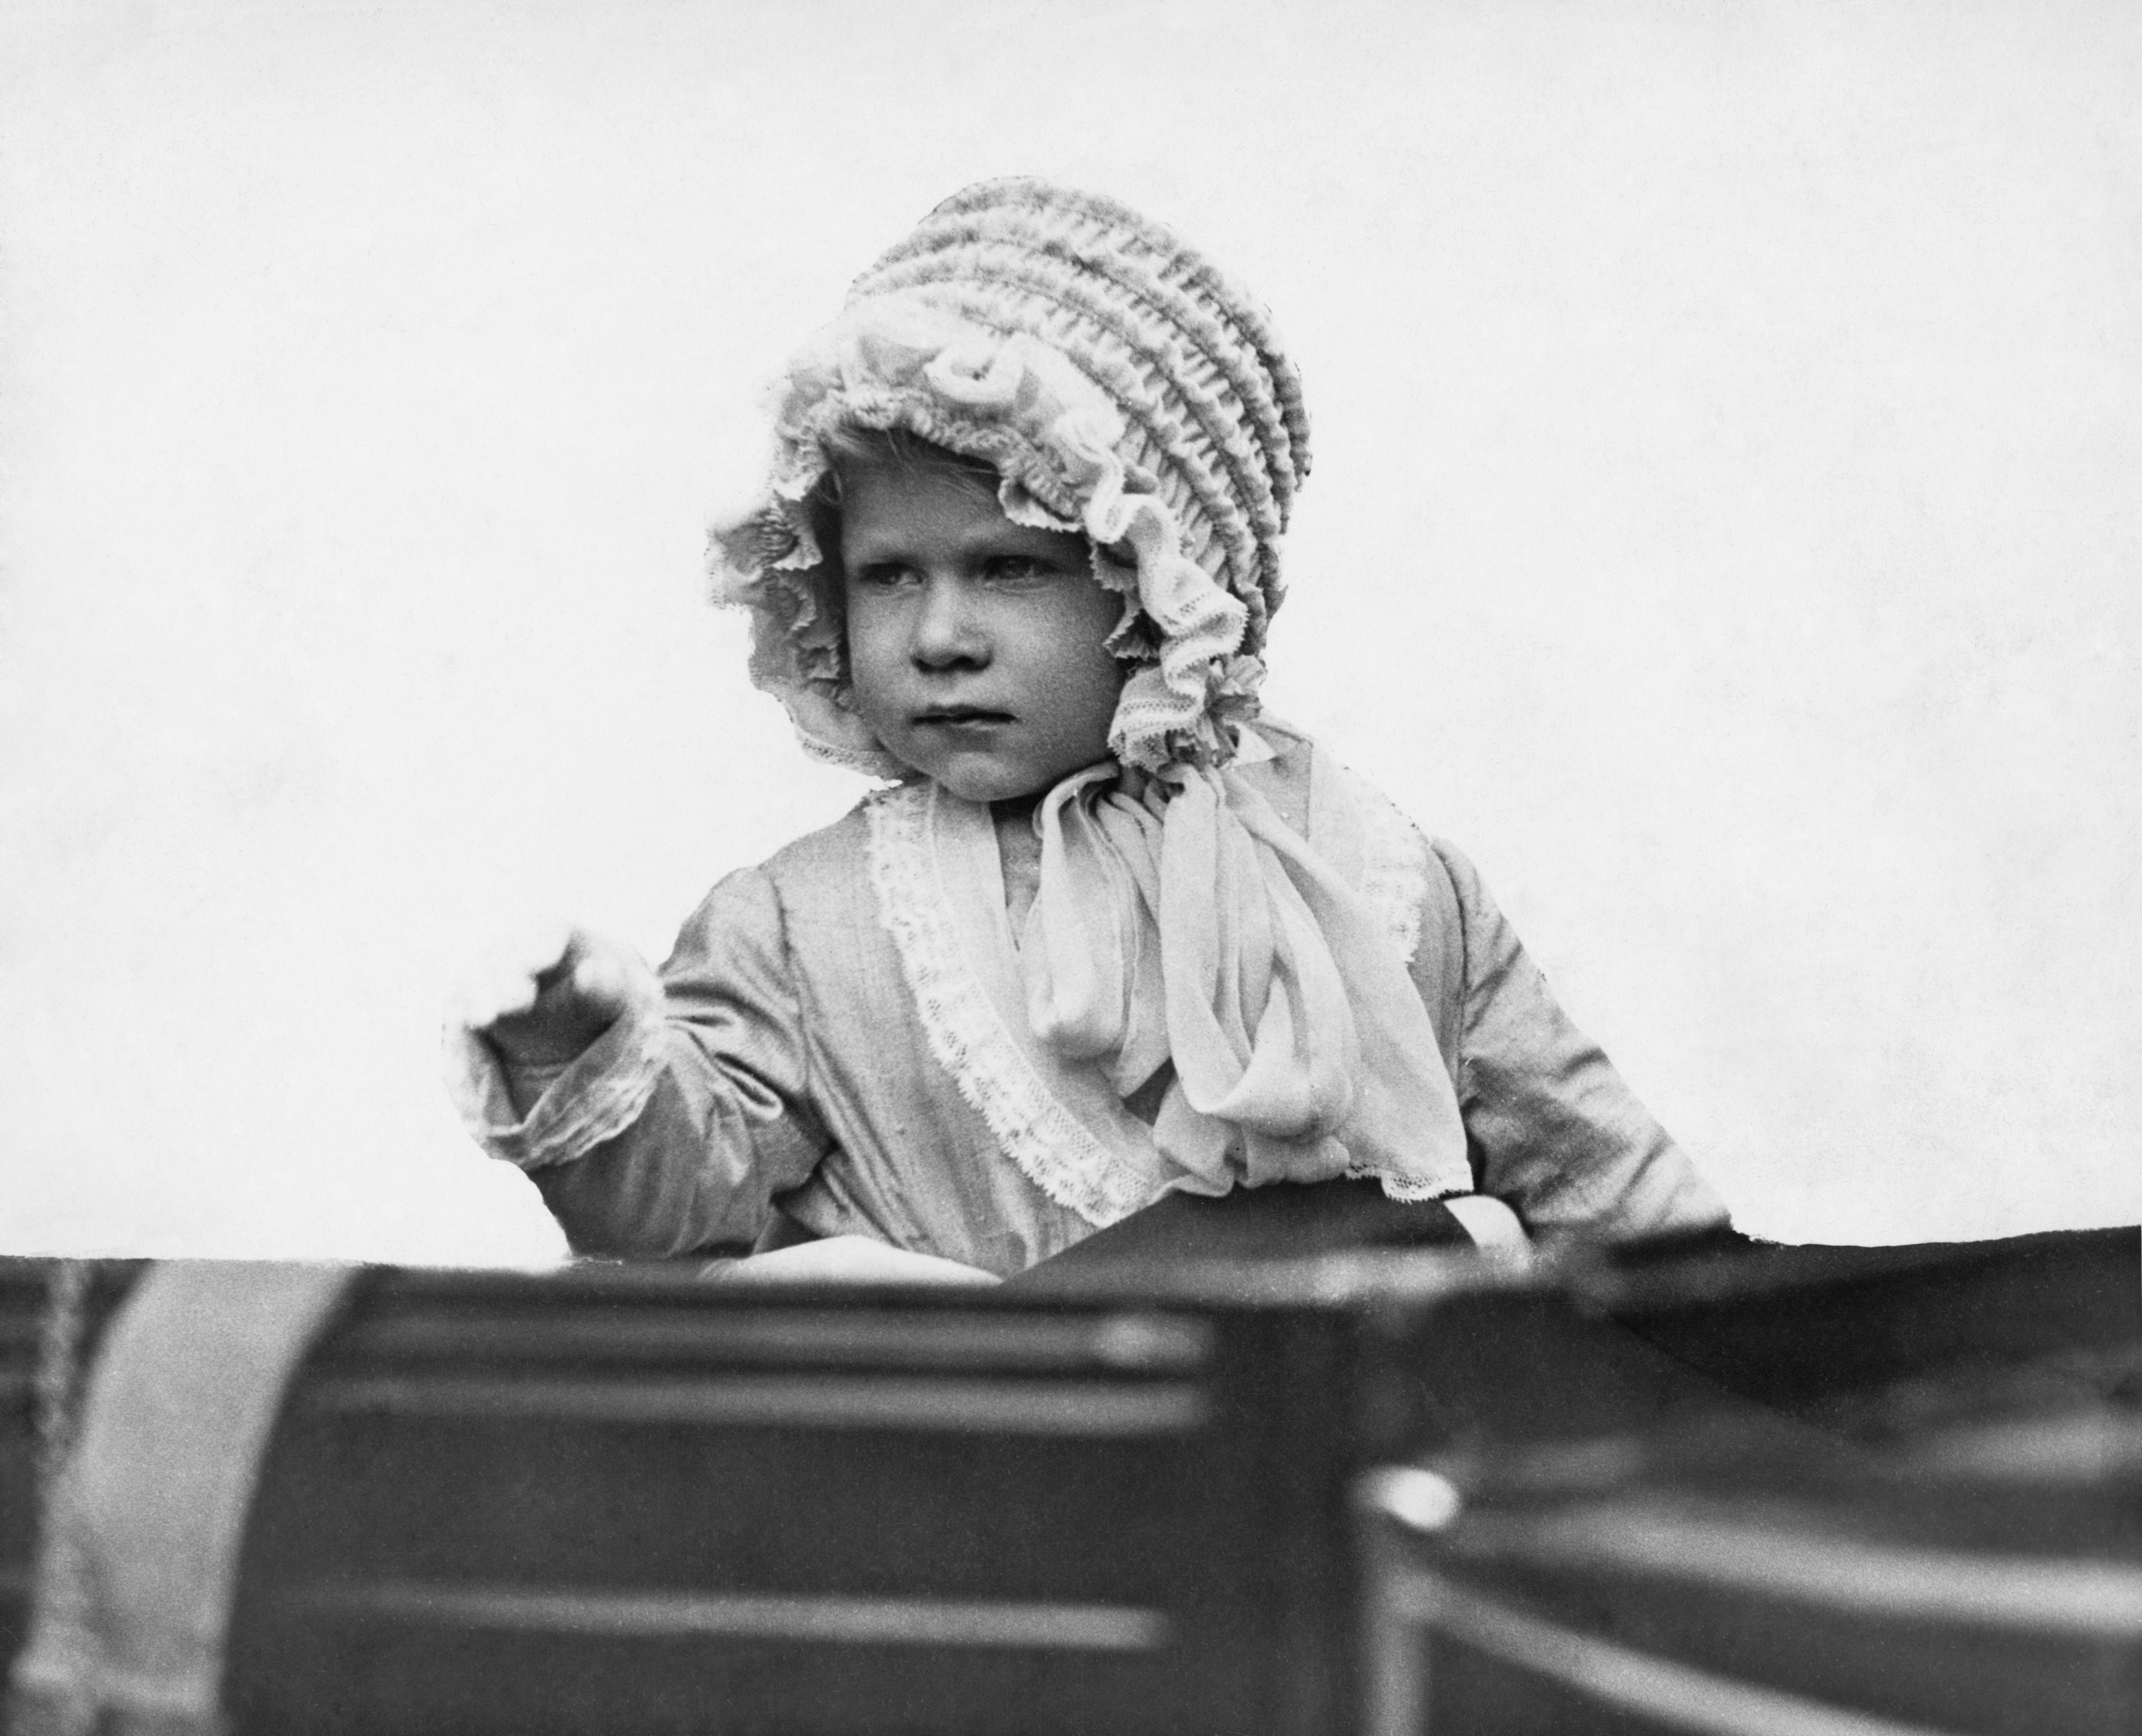 The young Princess Elizabeth pictured in 1928.